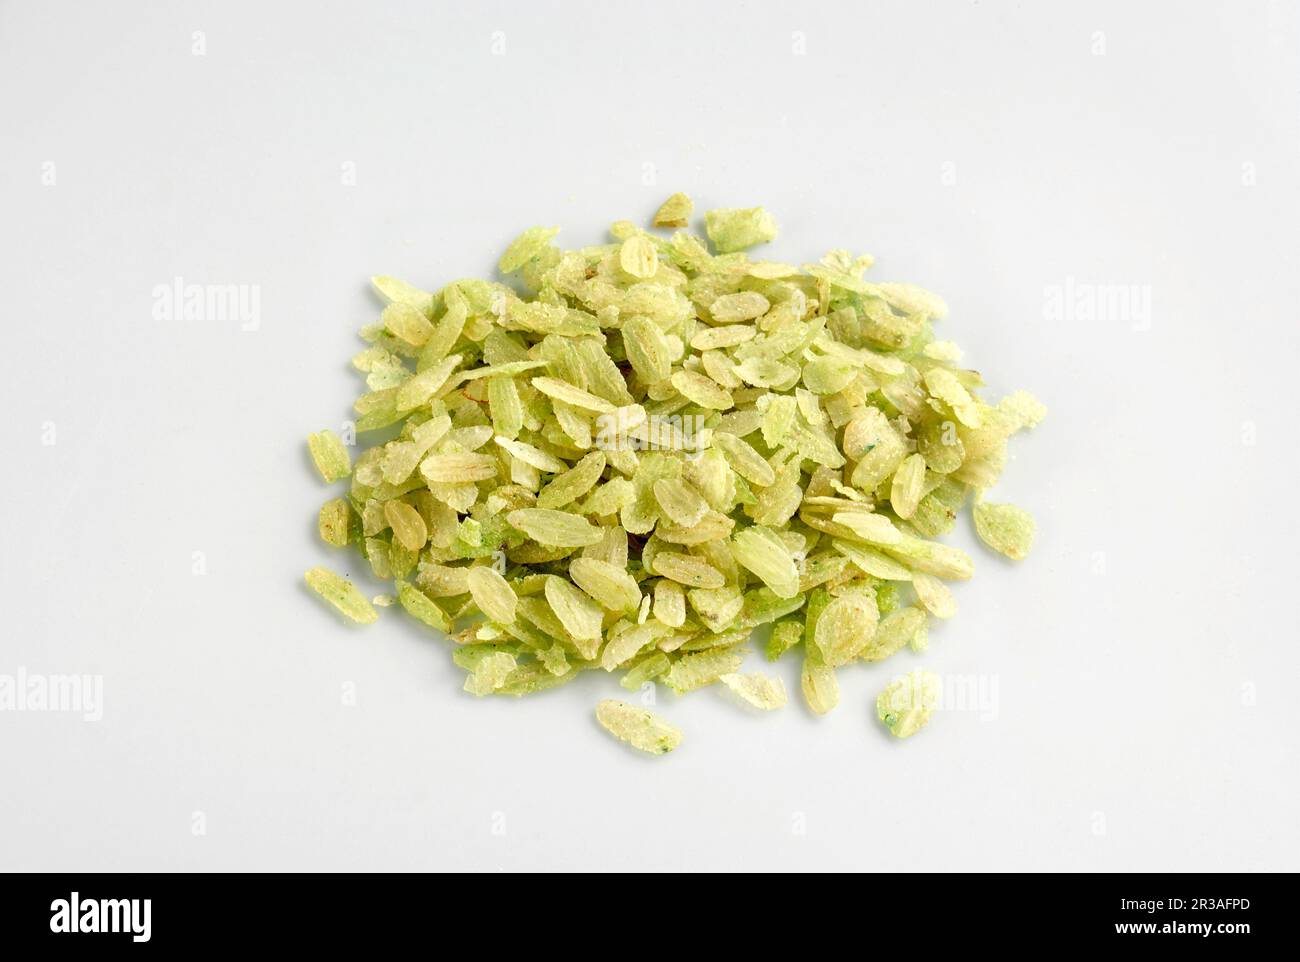 Aplati: green rice from Thailand Stock Photo